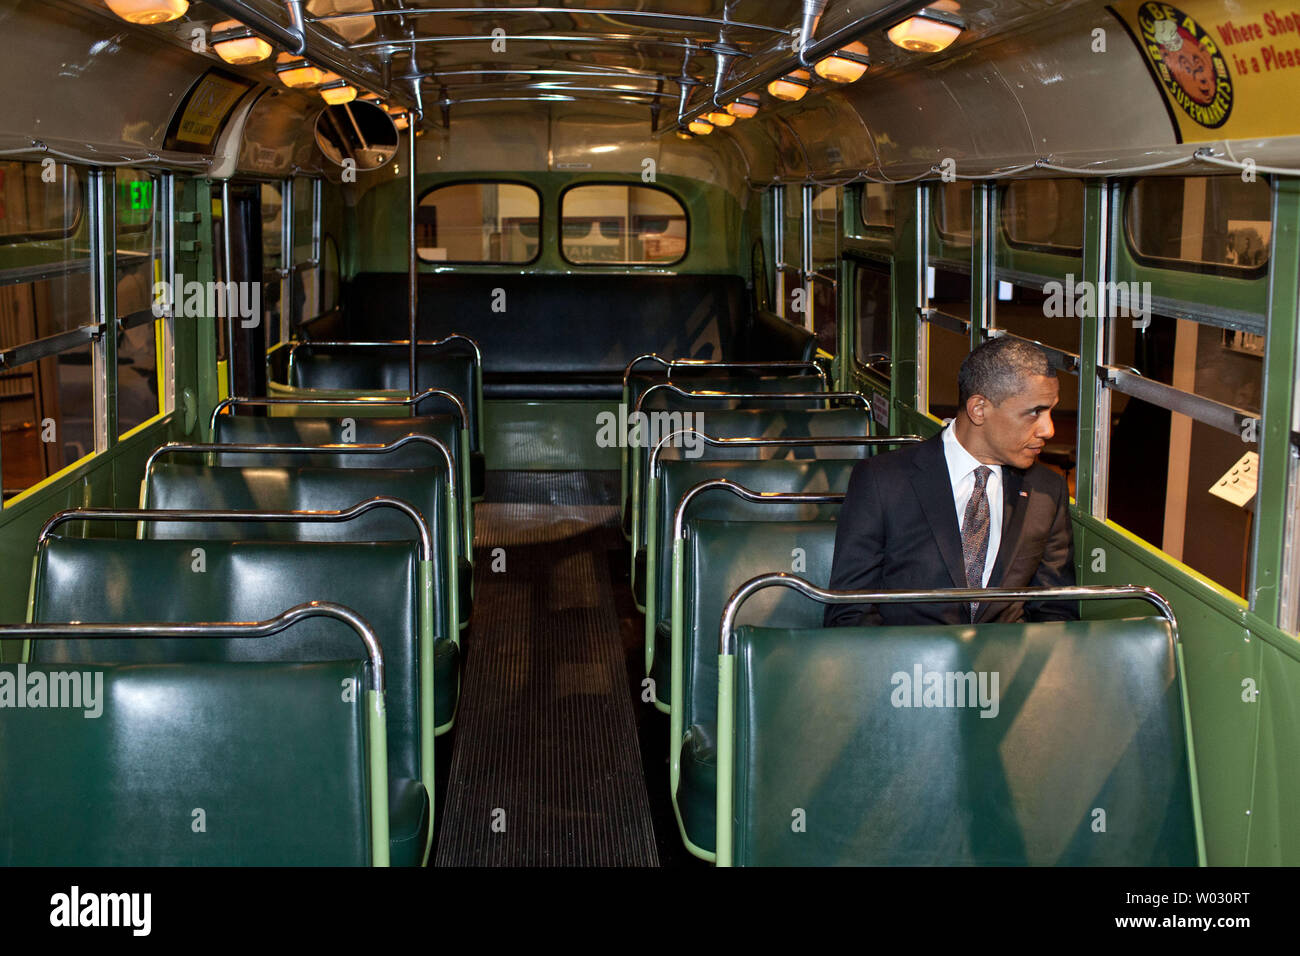 President Barack Obama sits on the famed Rosa Parks bus at the Henry Ford Museum following an event in Dearborn, Michigan, on April 18, 2012.  Rosa Parks refused to sit in the back of the bus on December 1, 1955 in Montgomery, Alabama, and this led to a bus boycott by African Americans. The bus is now considered a shrine in the civil rights movement.    UPI/White House/Pete Souza Stock Photo